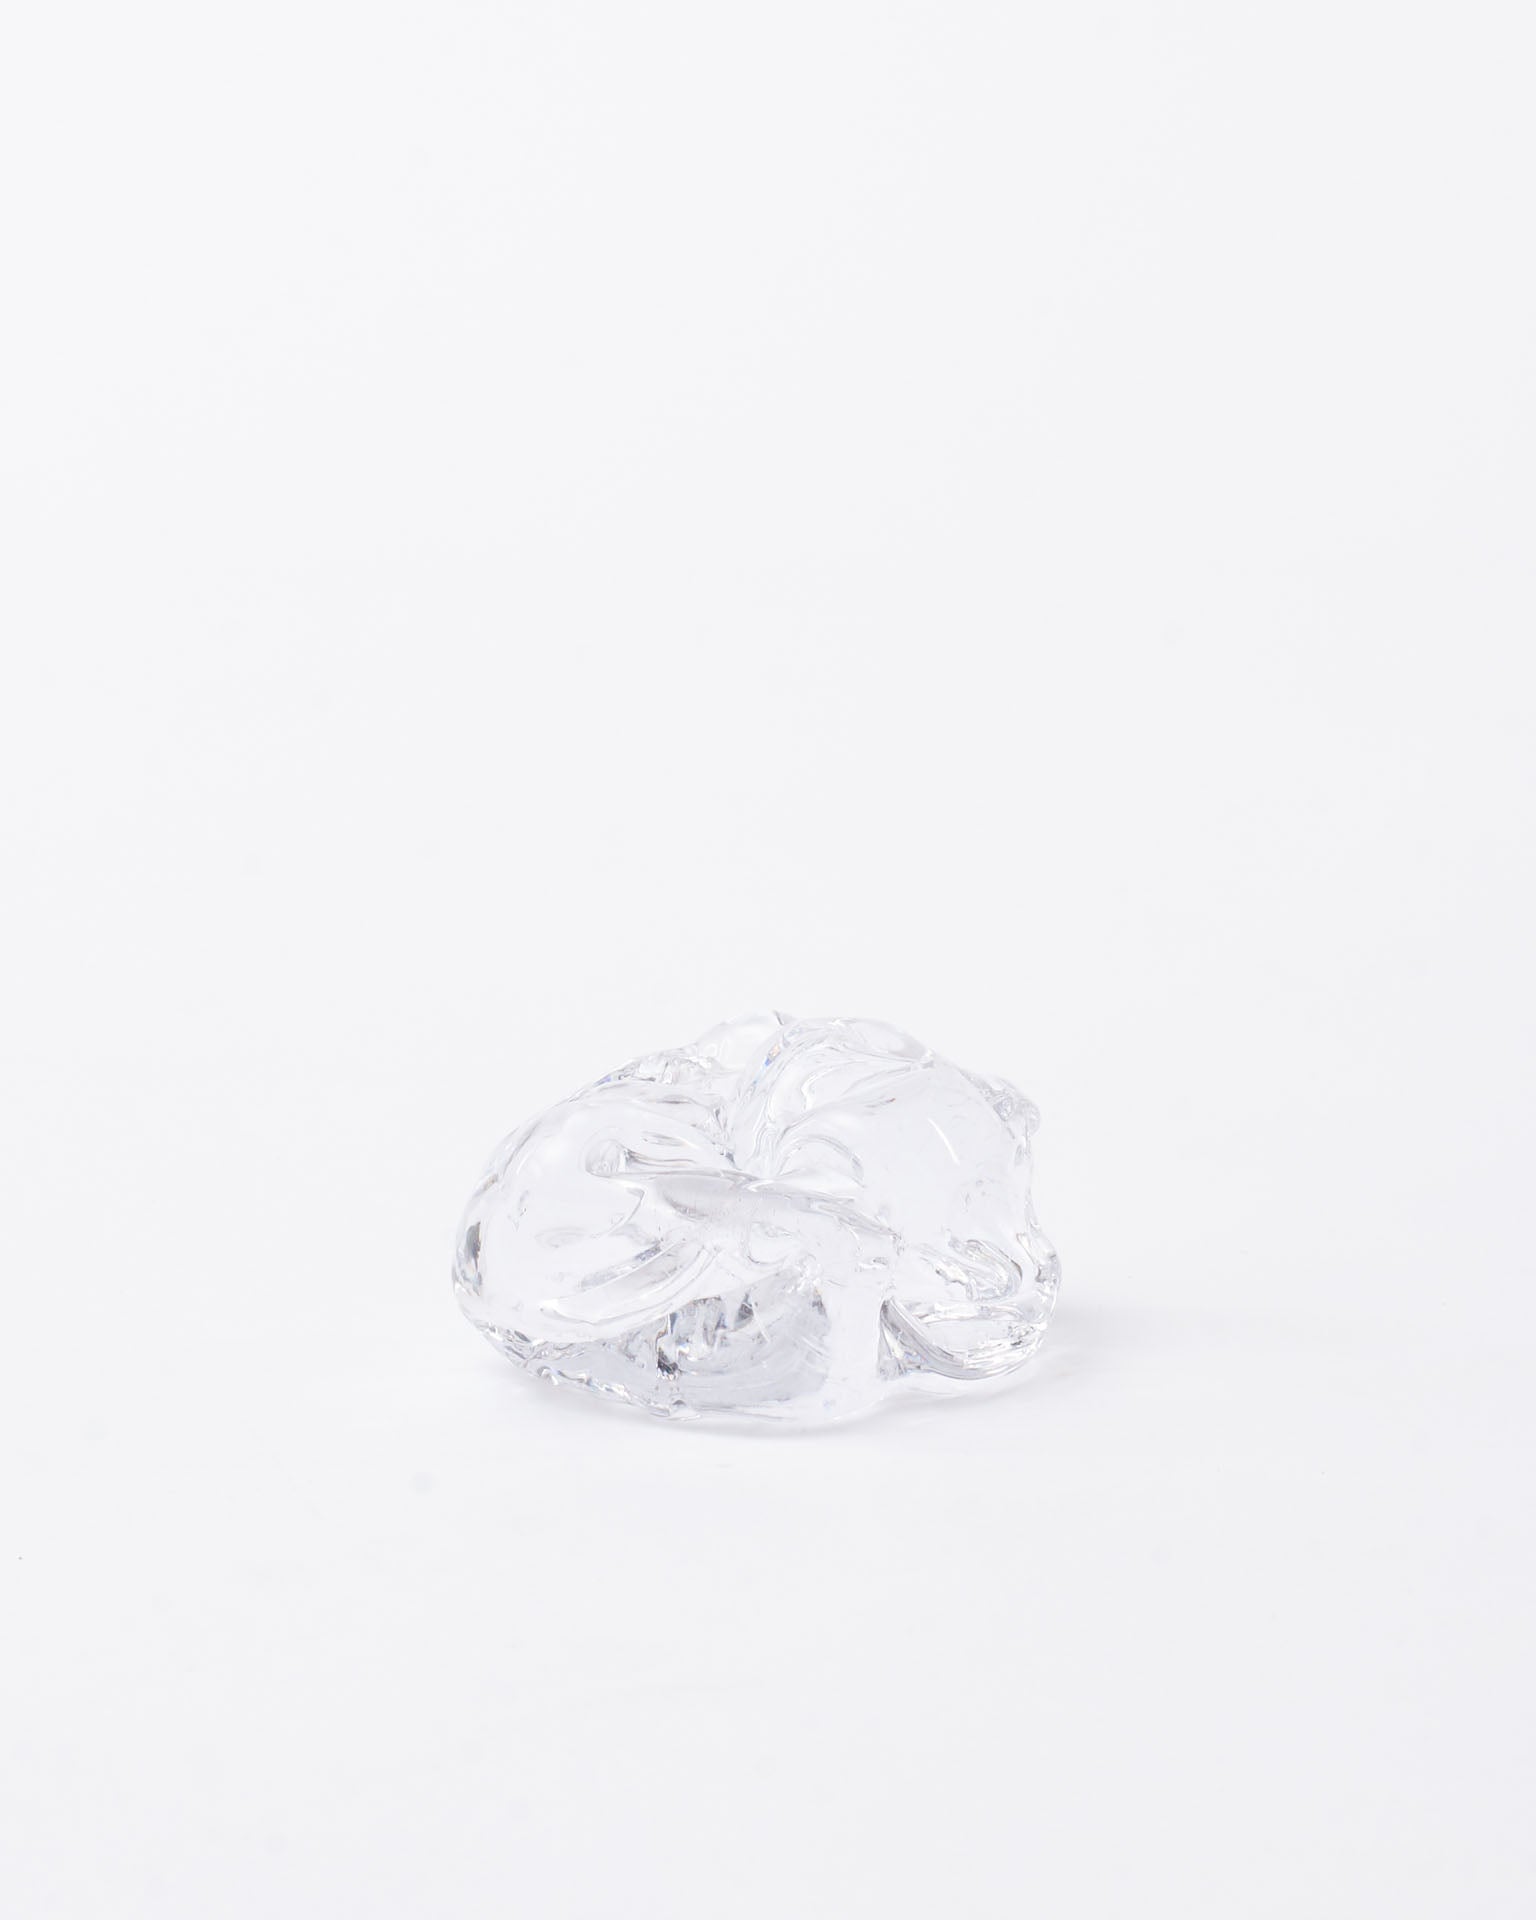 Handmade glass incense holder in white background in close view